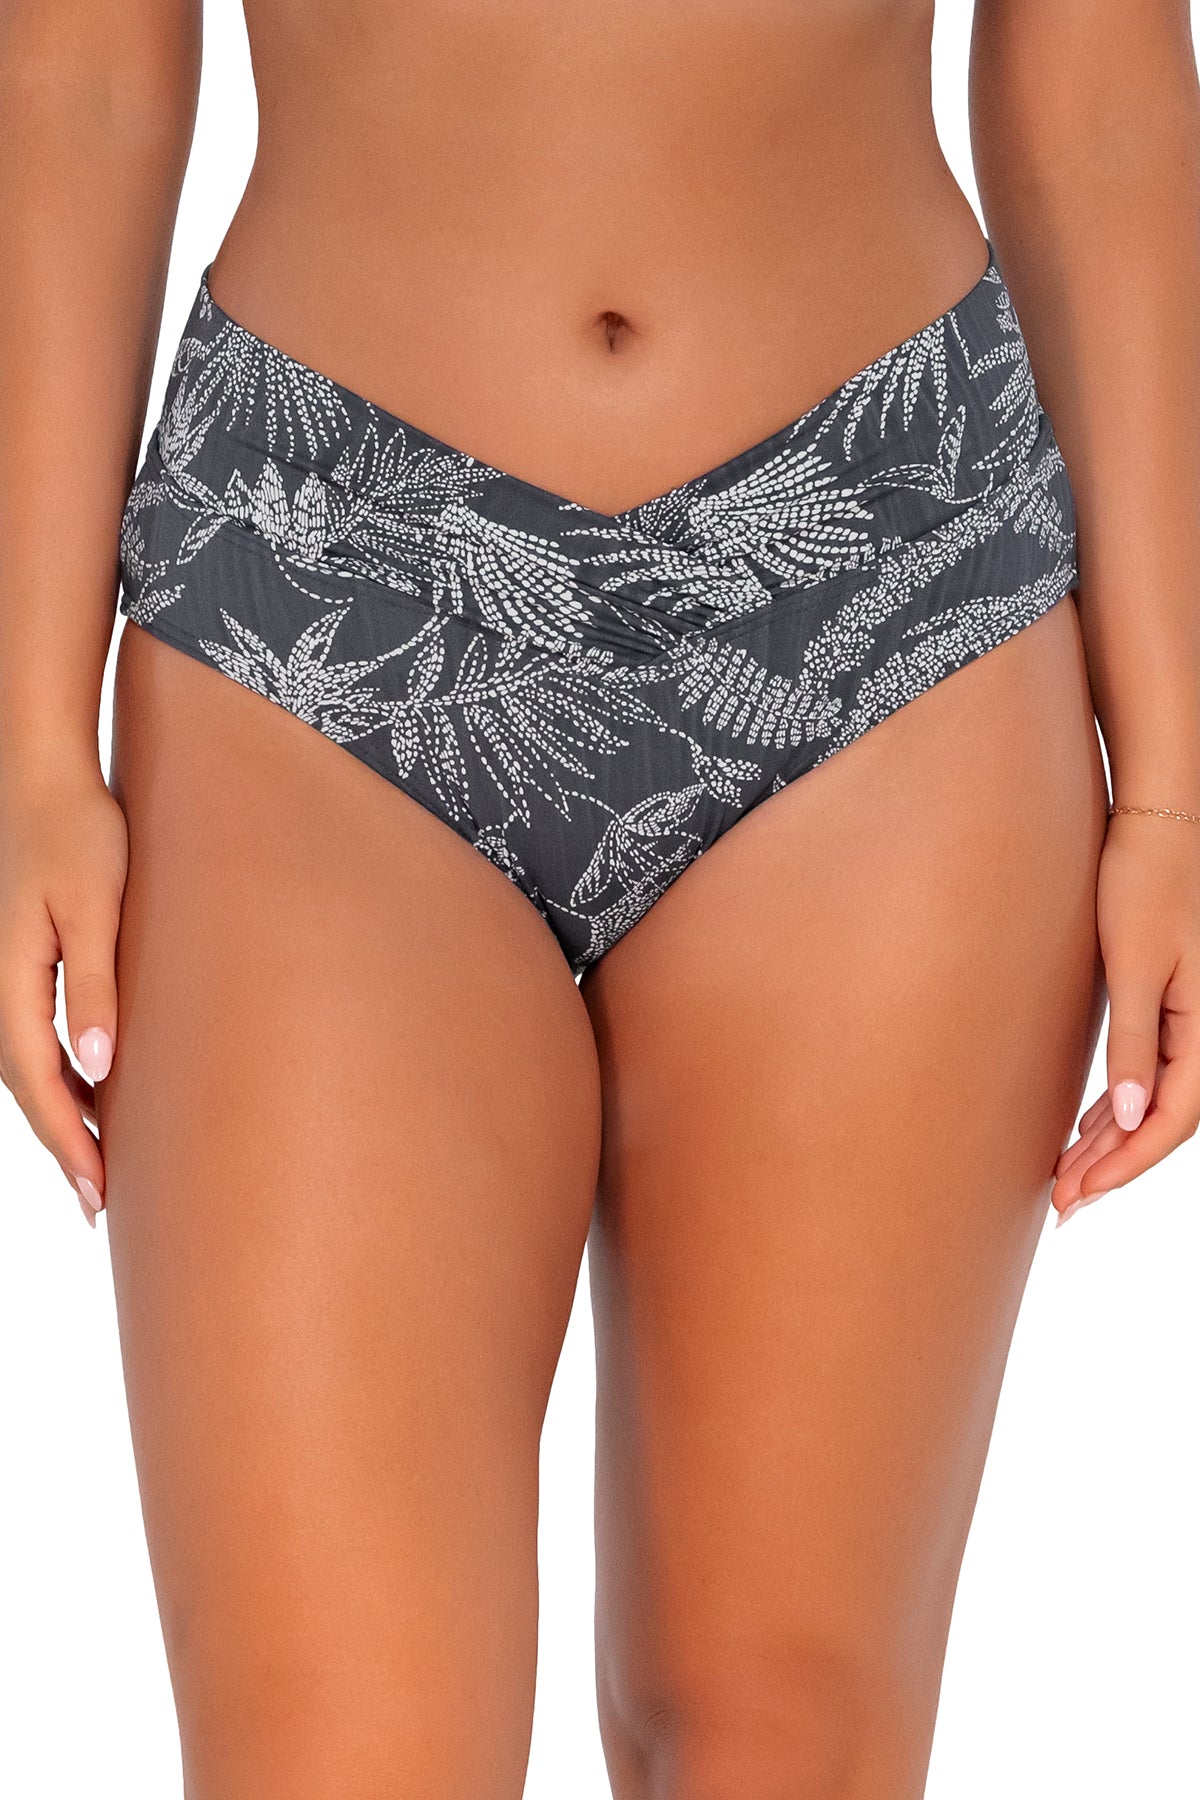 Front pose #1 of Taylor wearing Sunsets Fanfare Seagrass Texture Summer Lovin' V-Front Bottom